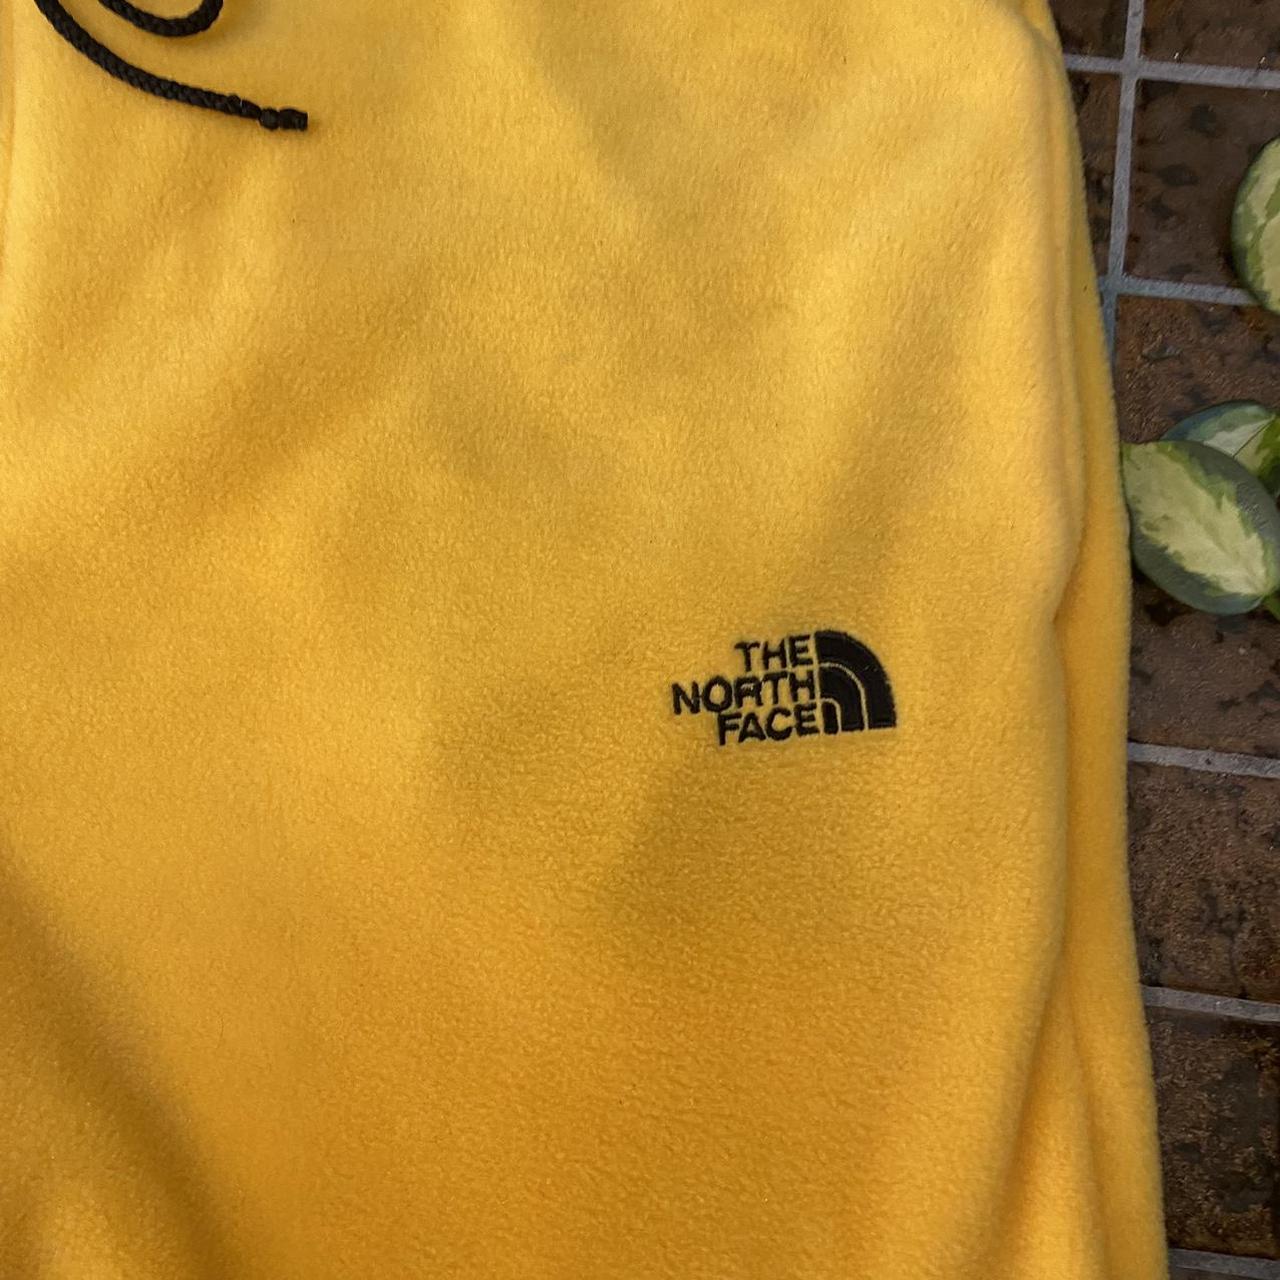 The North Face Men's Yellow Joggers-tracksuits | Depop